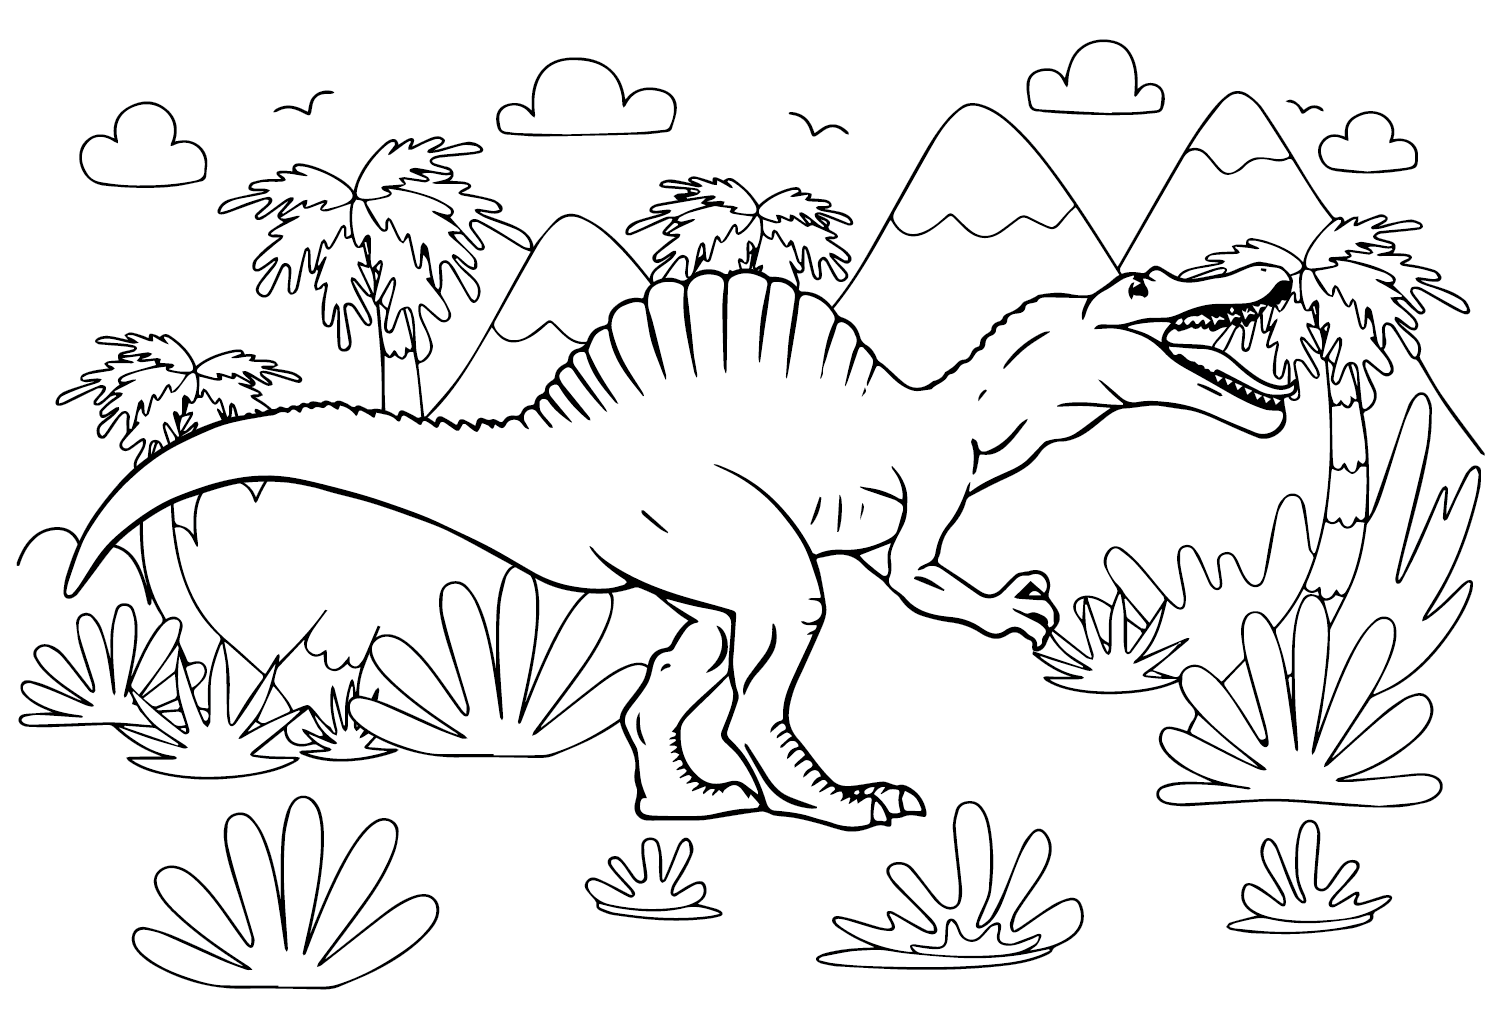 Images Spinosaurus Aegyptiacus Coloring Page from Spinosaurus Aegyptiacus